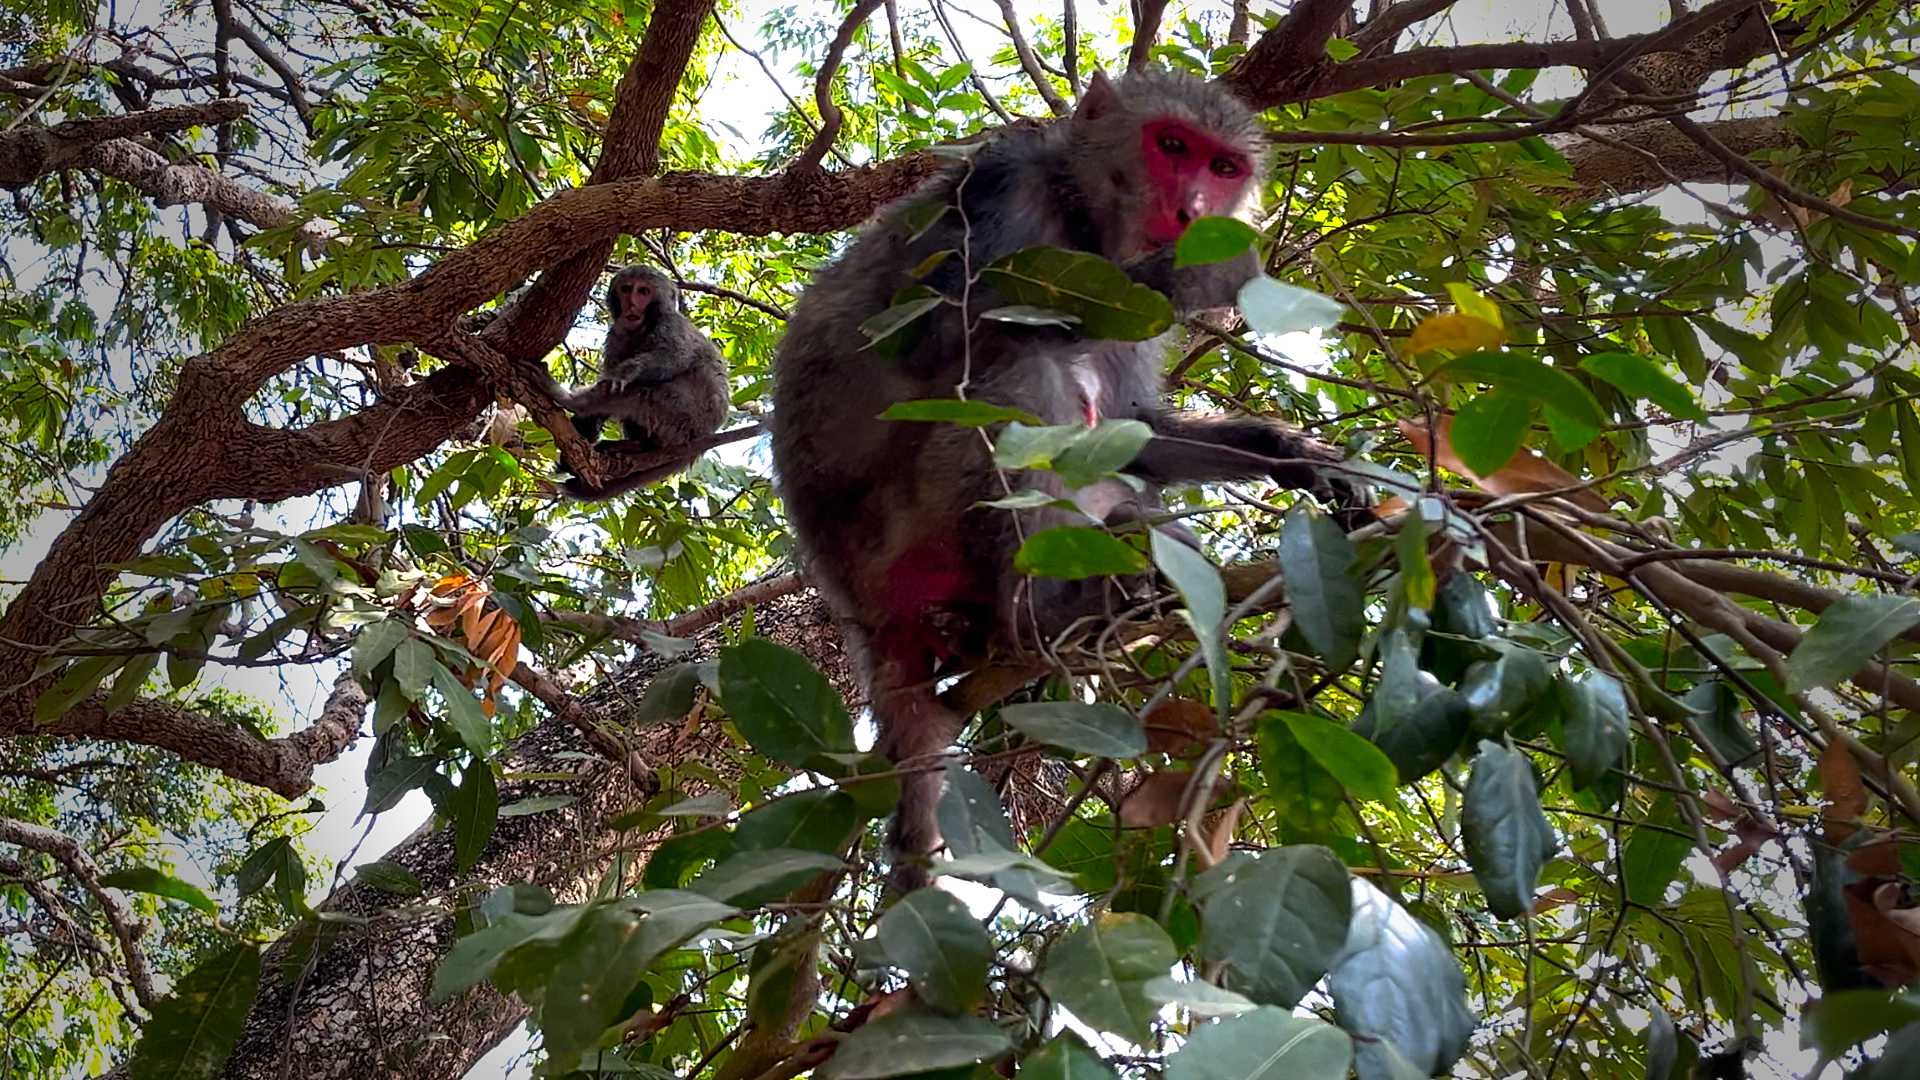 To monkeys eating in a tree.